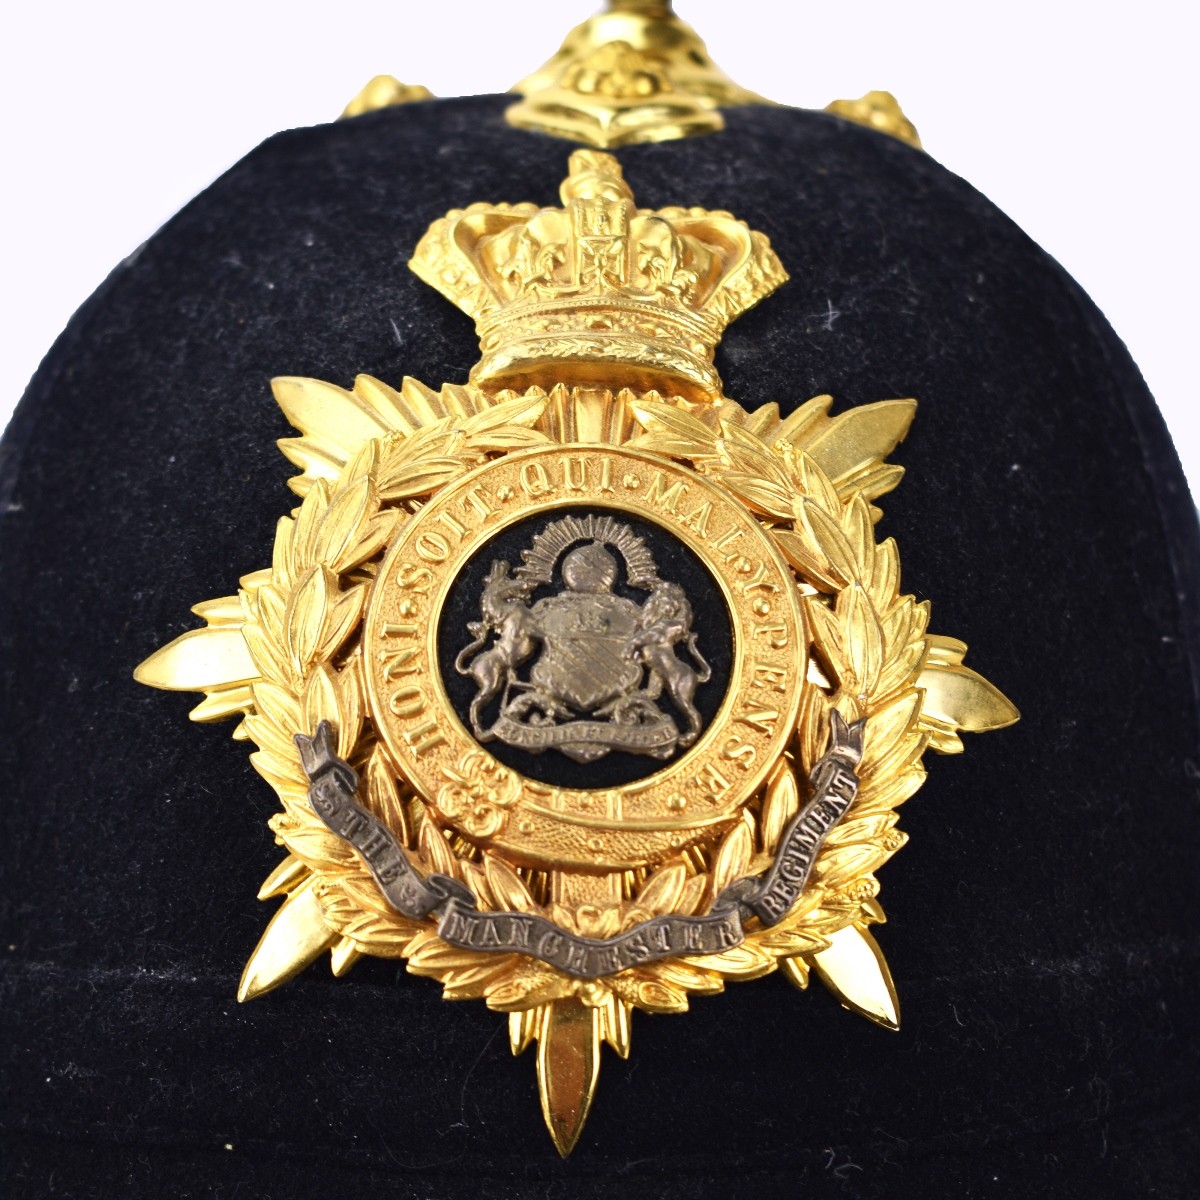 Grouping Of Two (2) European Military Hats